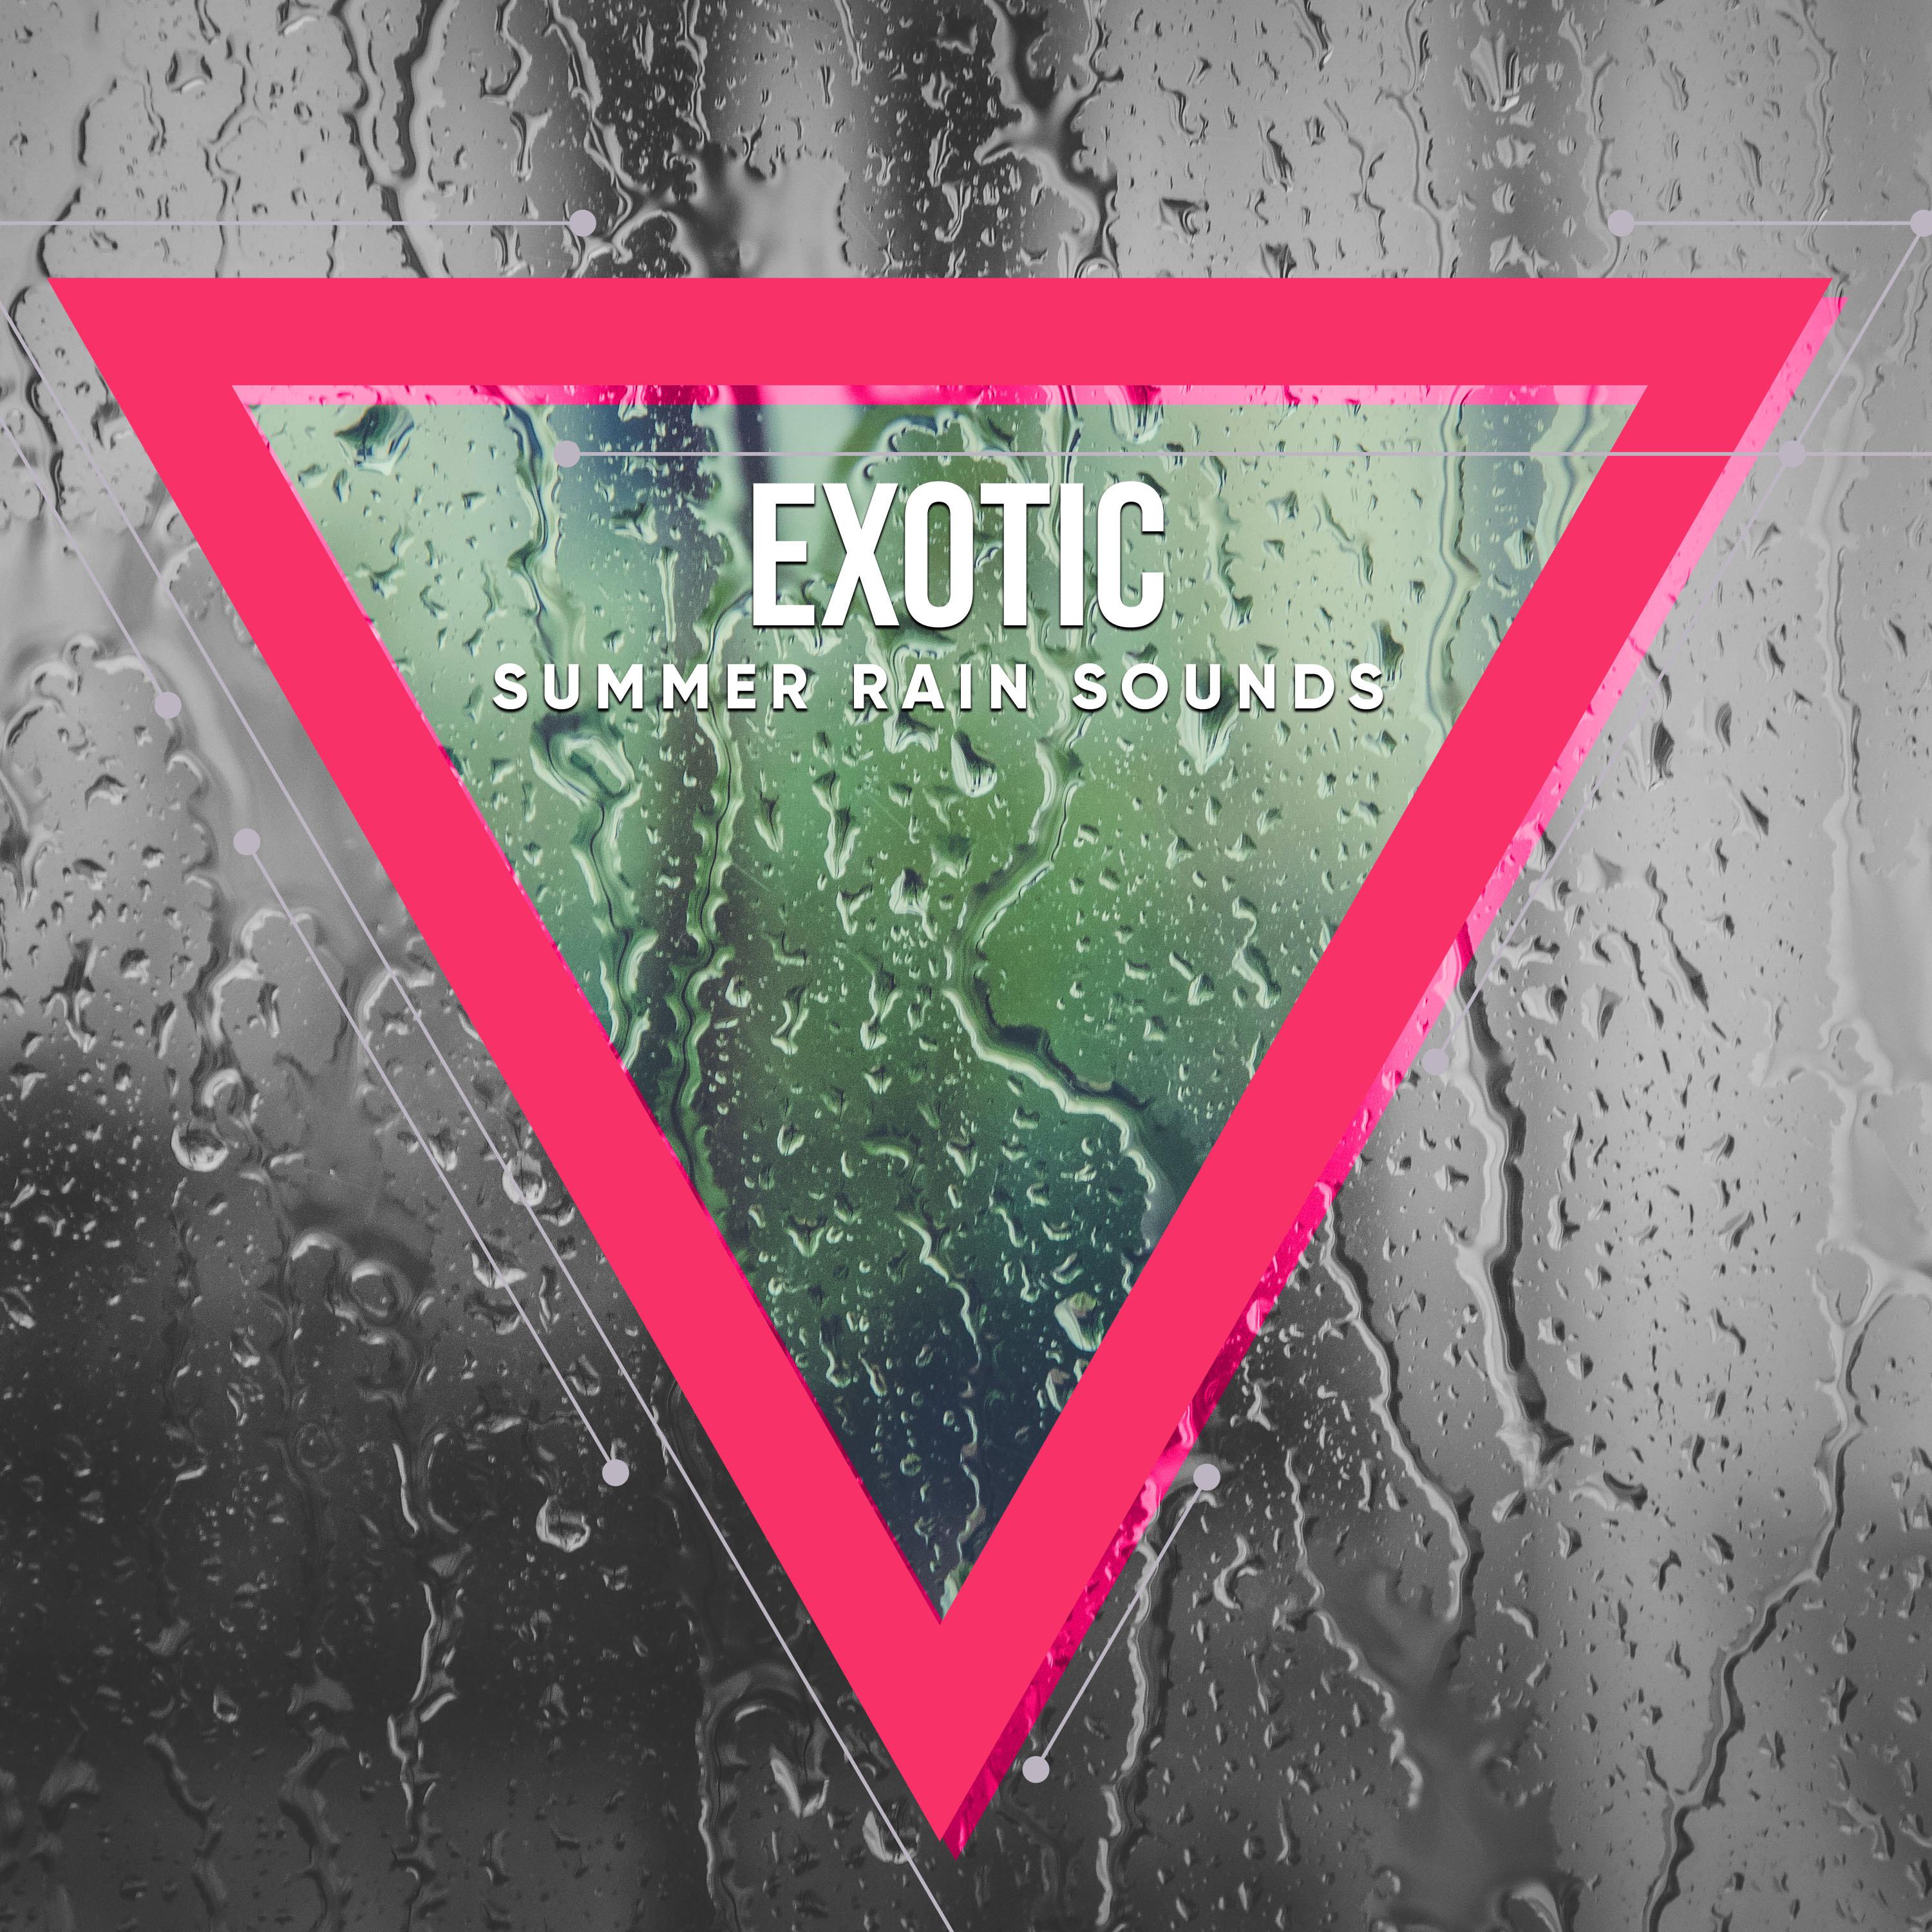 #20 Exotic Summer Rain Sounds from Nature